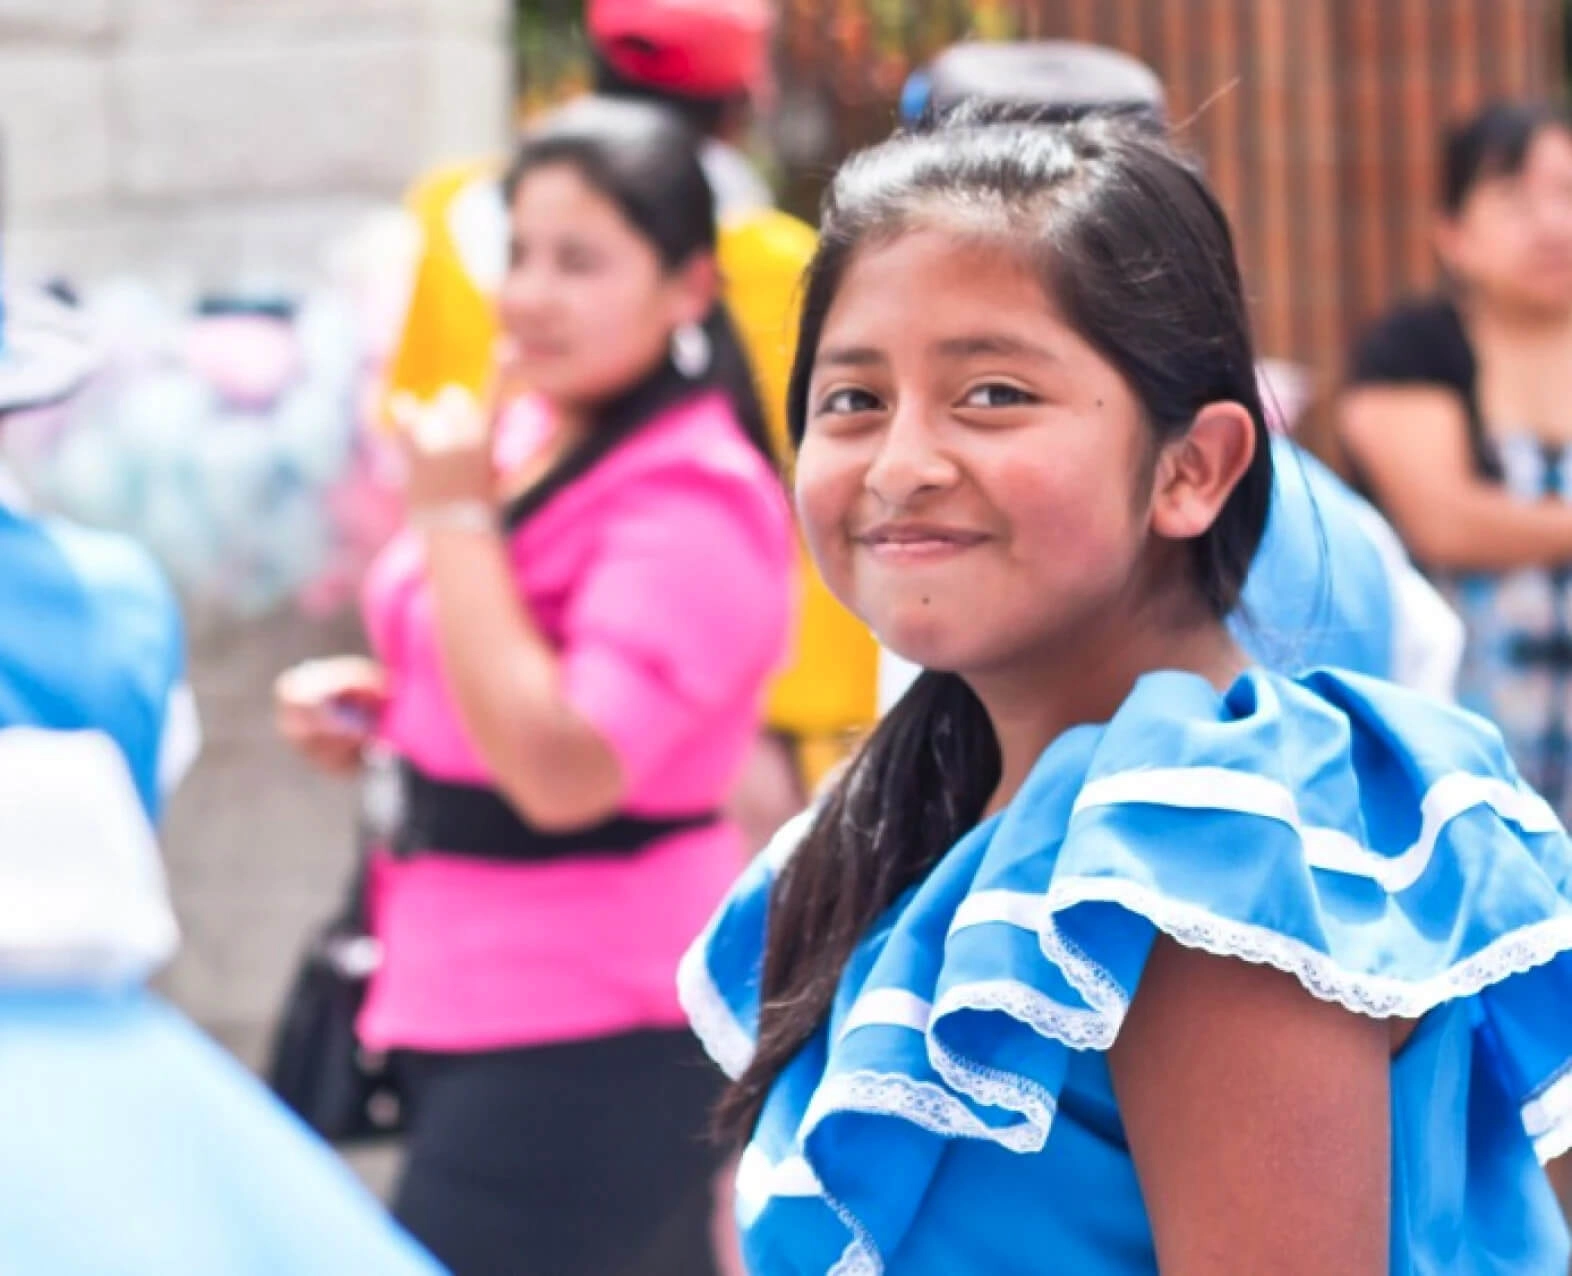 A young girl smiling during a community event with other people in the background. (photo)